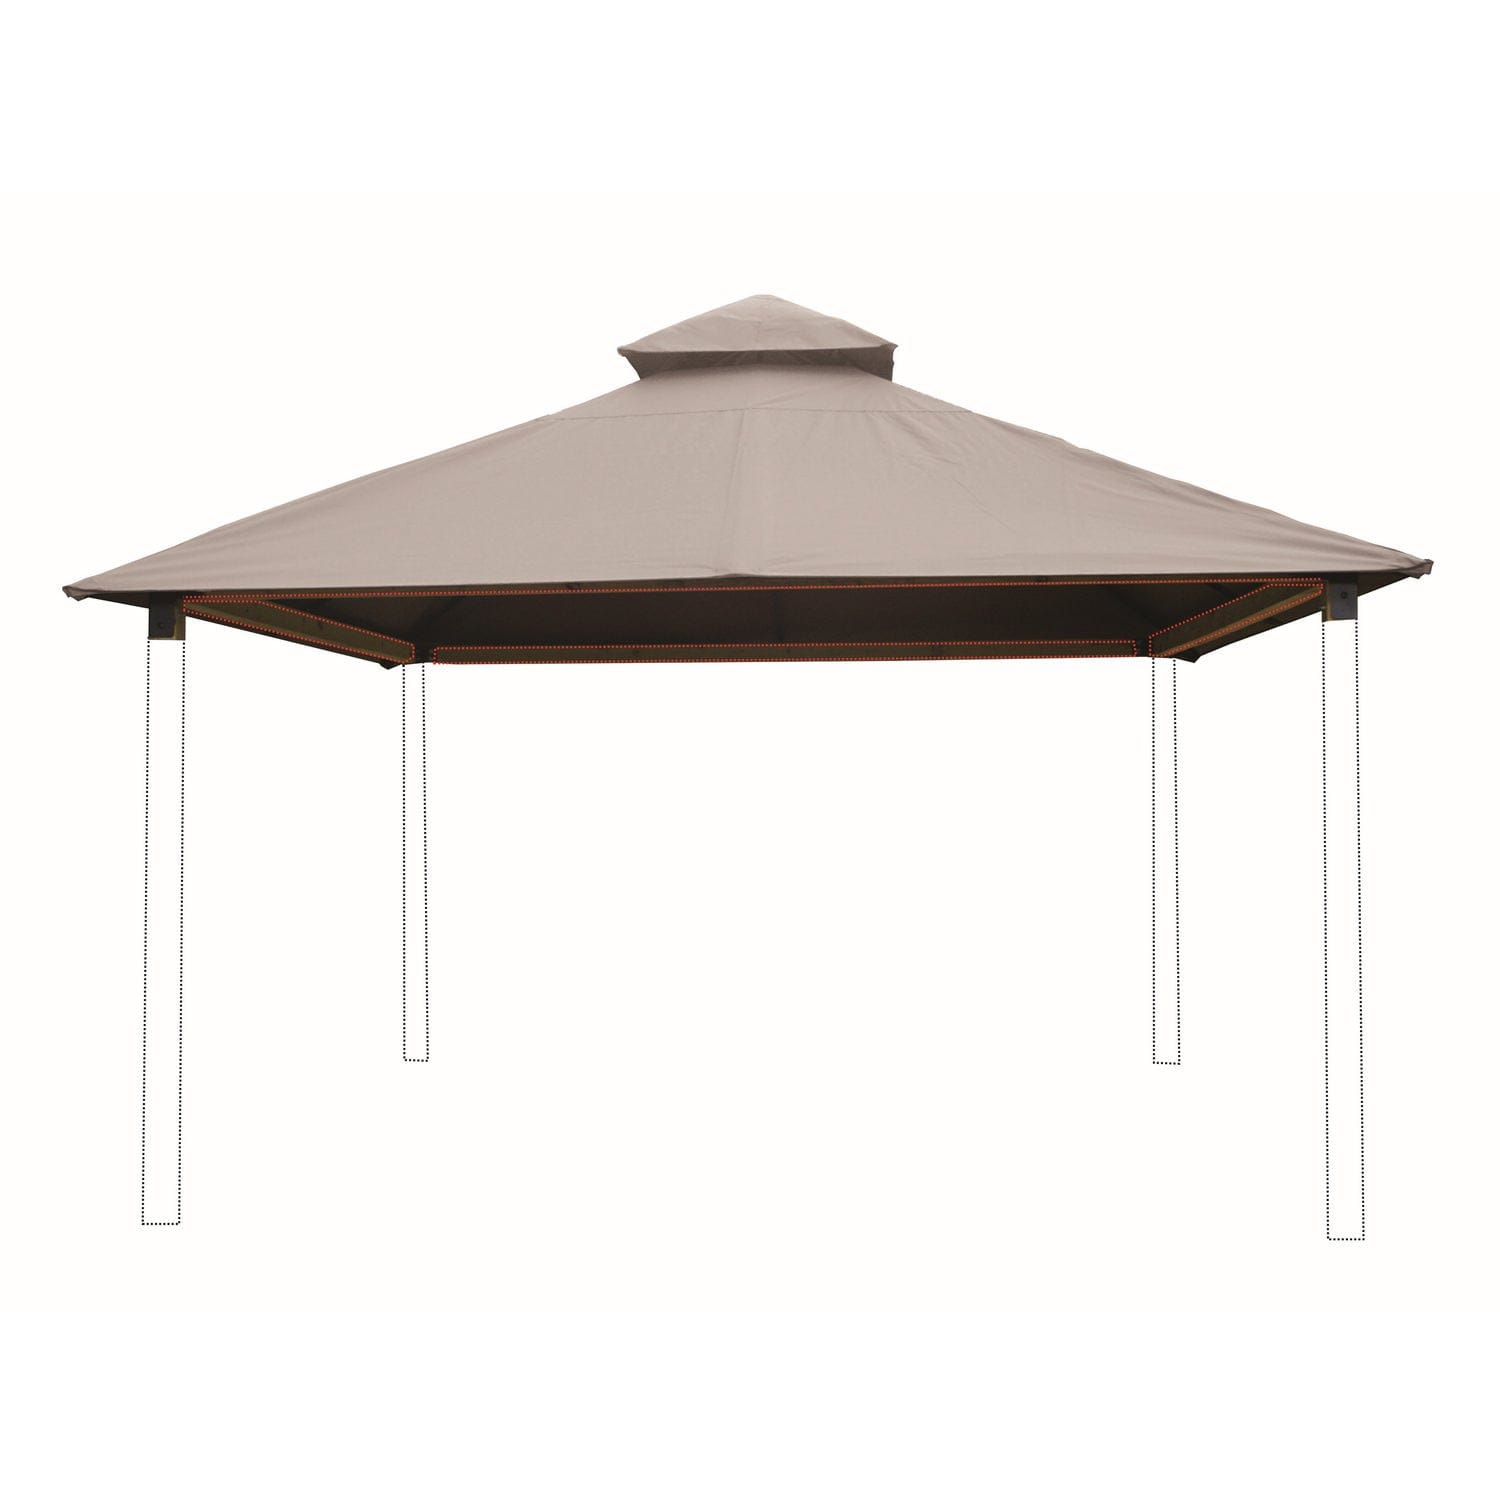 Riverstone Industries Soft Top Gazebos 12FT X 12FT Riverstone | ACACIA Gazebo Roof Framing and Mounting Kit With OutDURA Canopy - Sand AGOK12-SAND